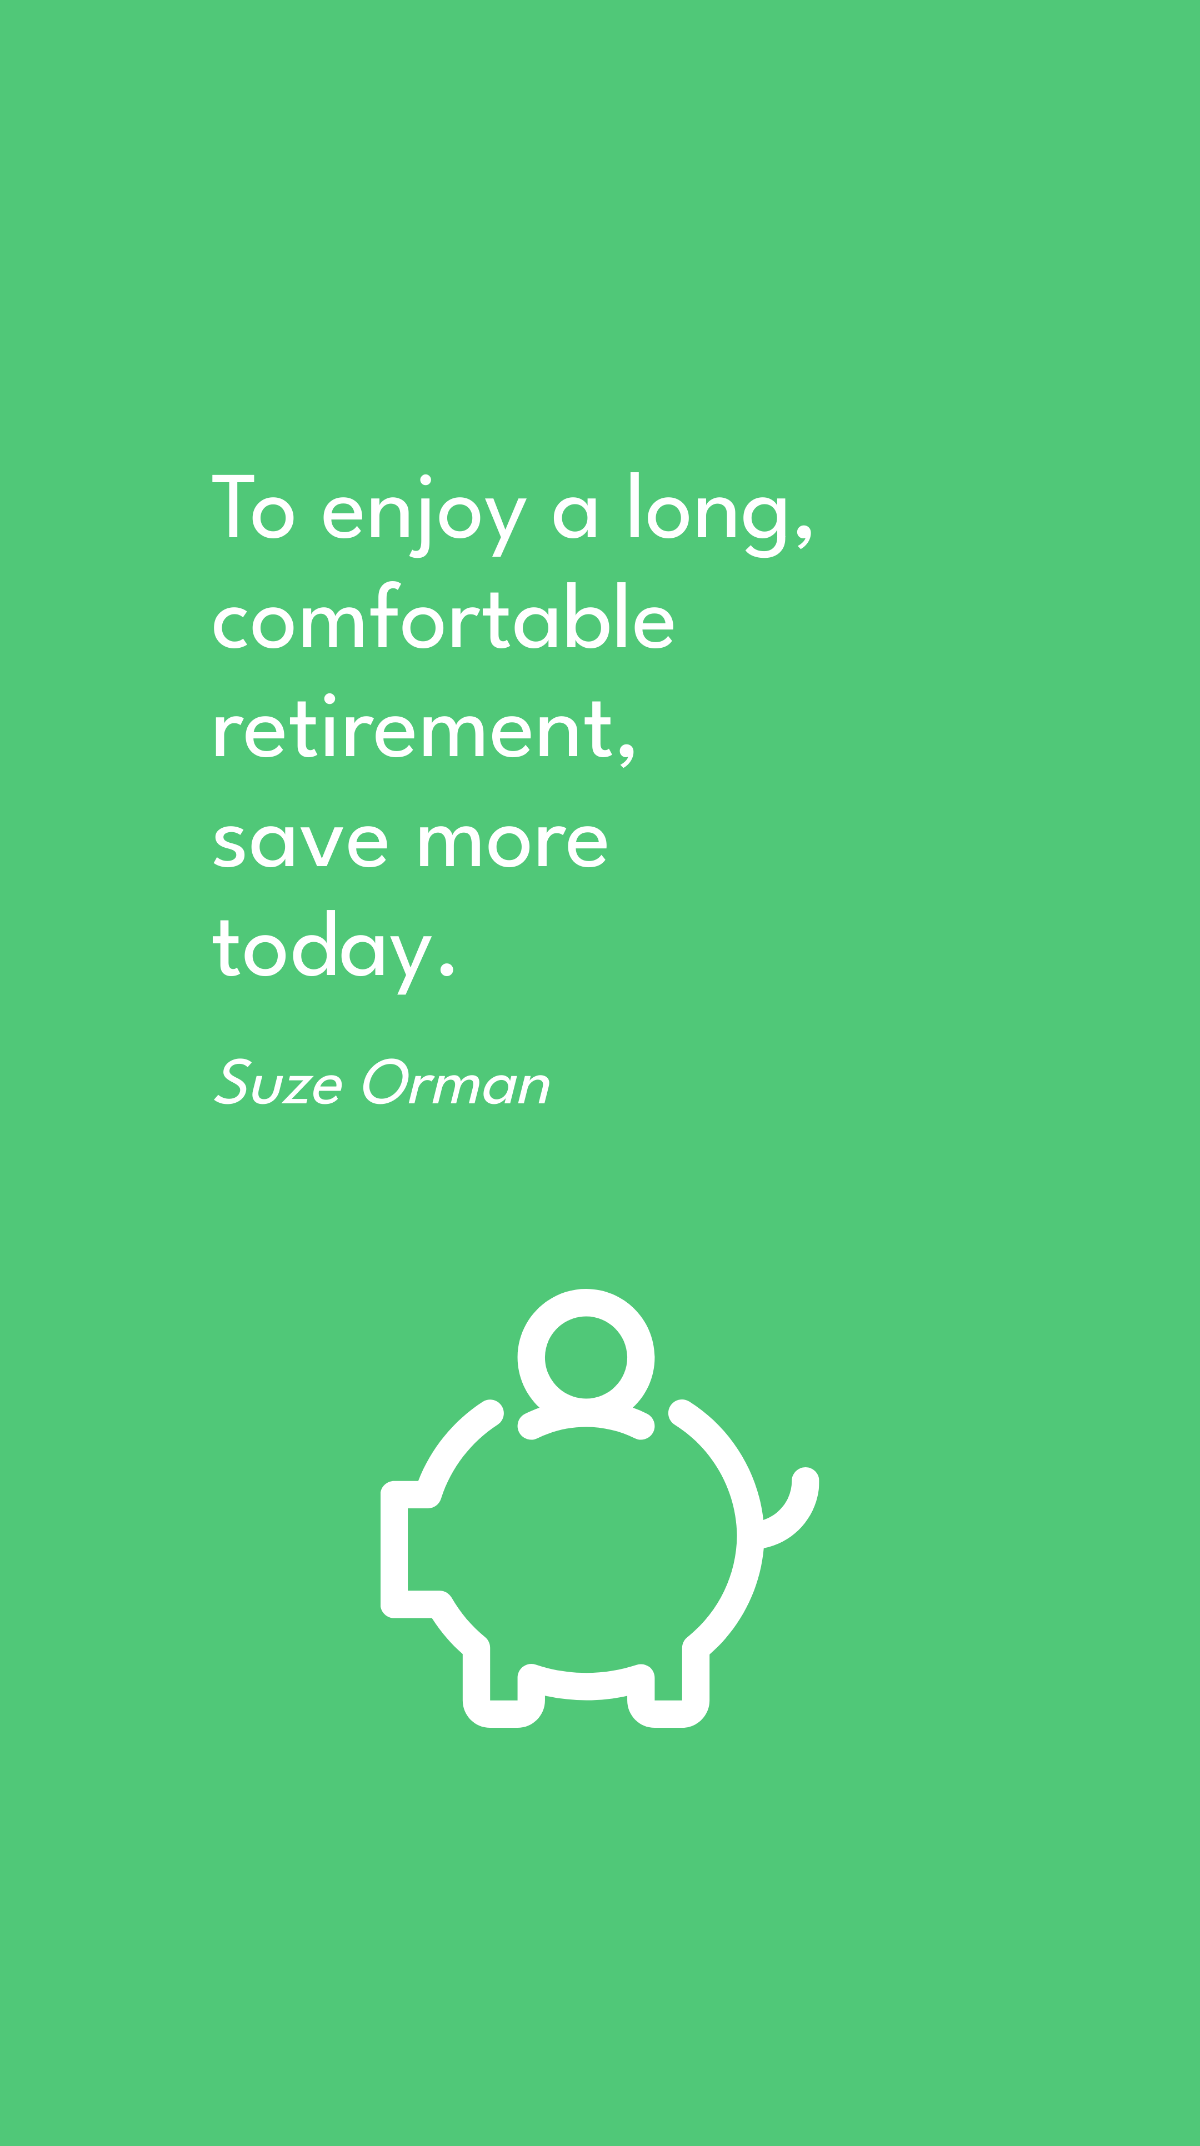 Suze Orman - To enjoy a long, comfortable retirement, save more today.